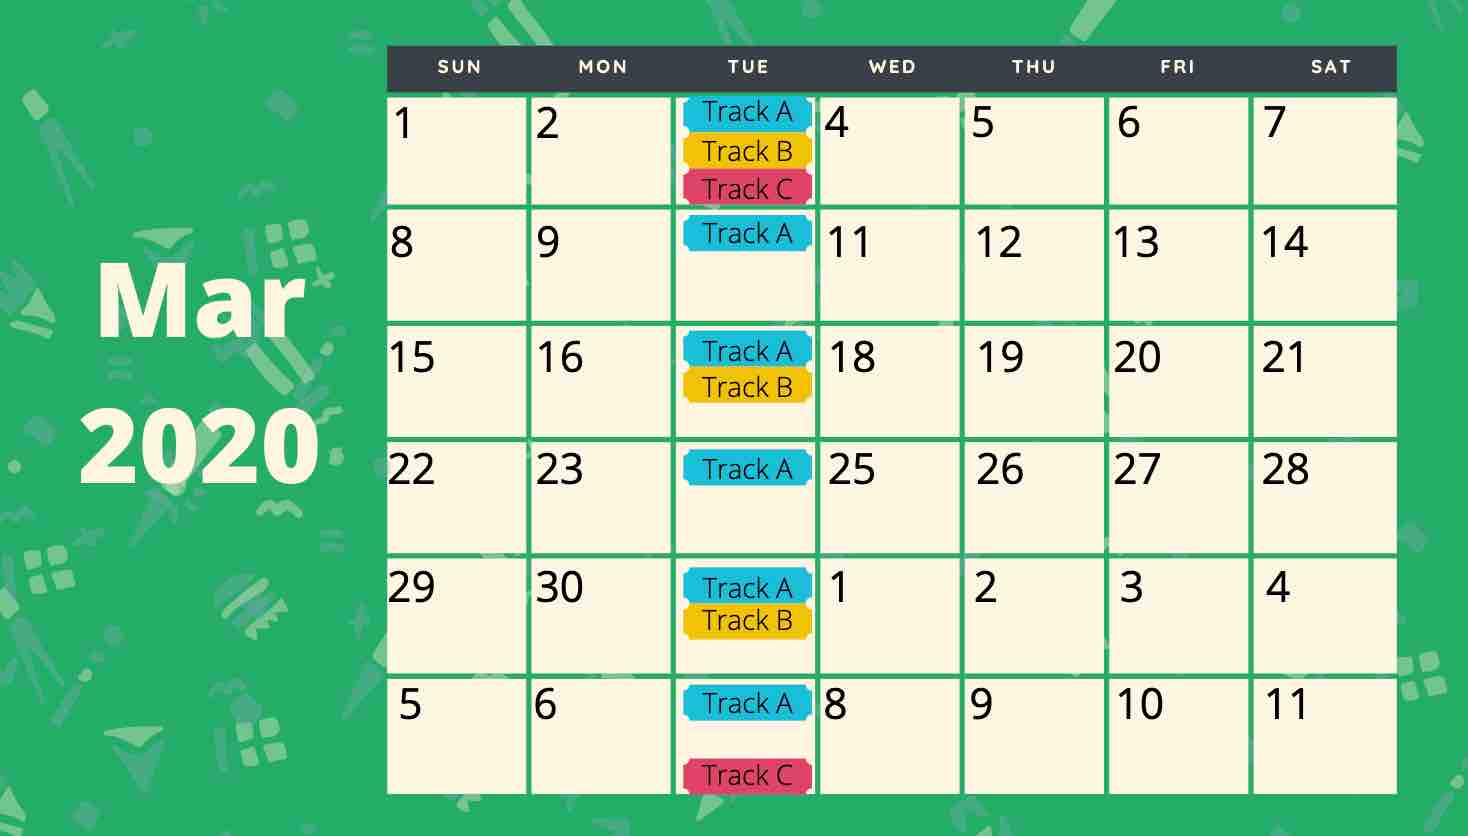 Calendar view of a weekly sending schedule for all tracks